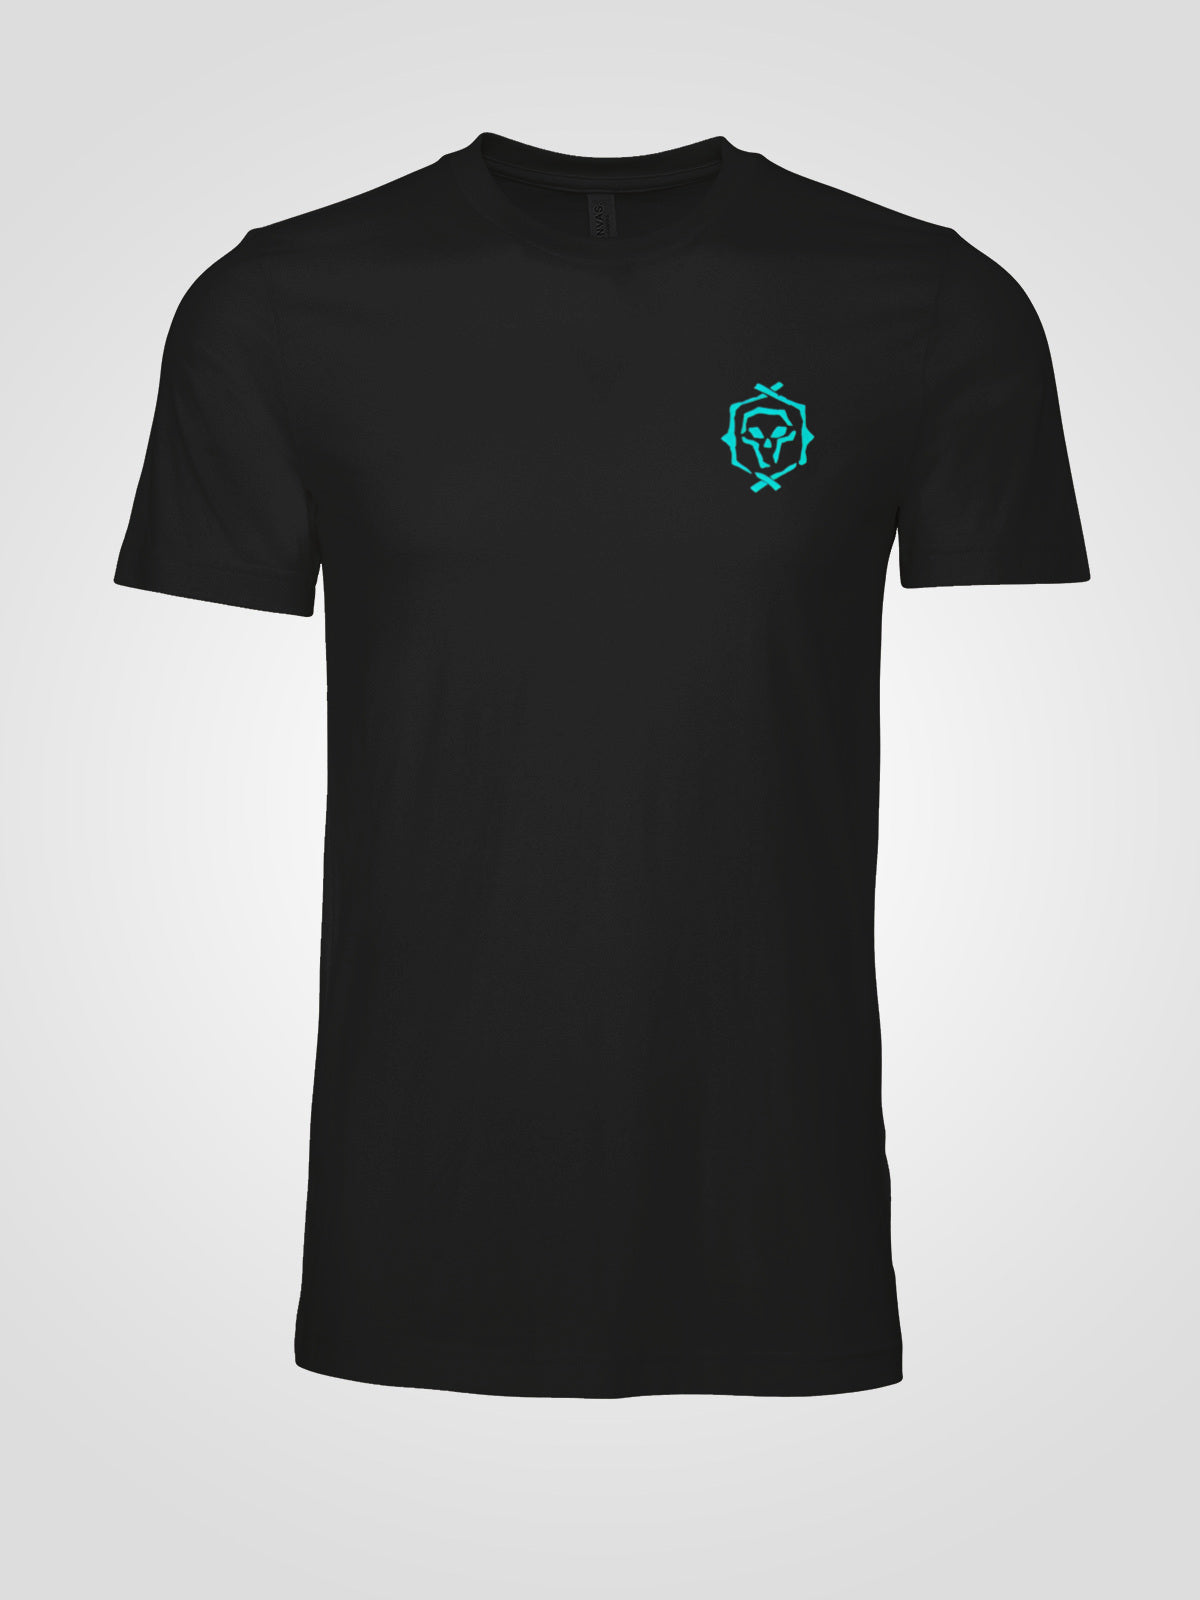 Sea of Thieves Pirate Legend T Shirts - Contour Eco